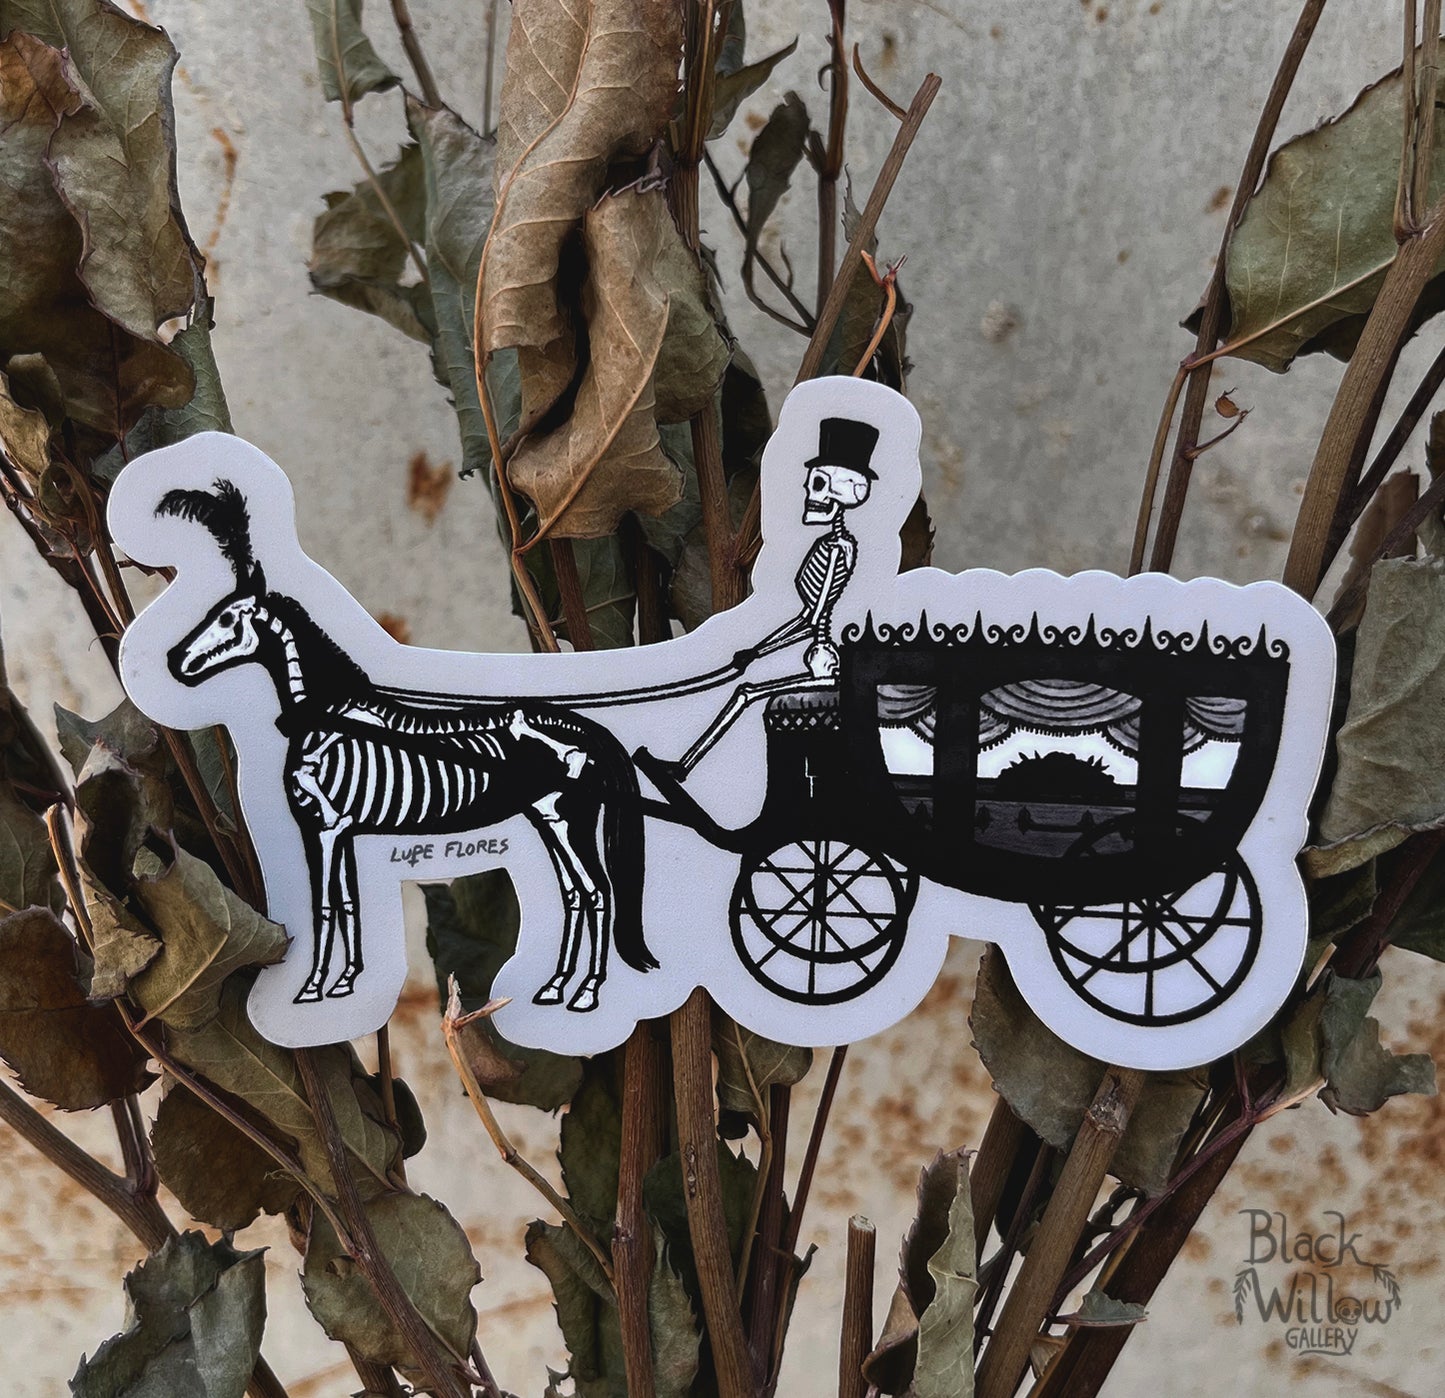 Funeral Carriage Sticker